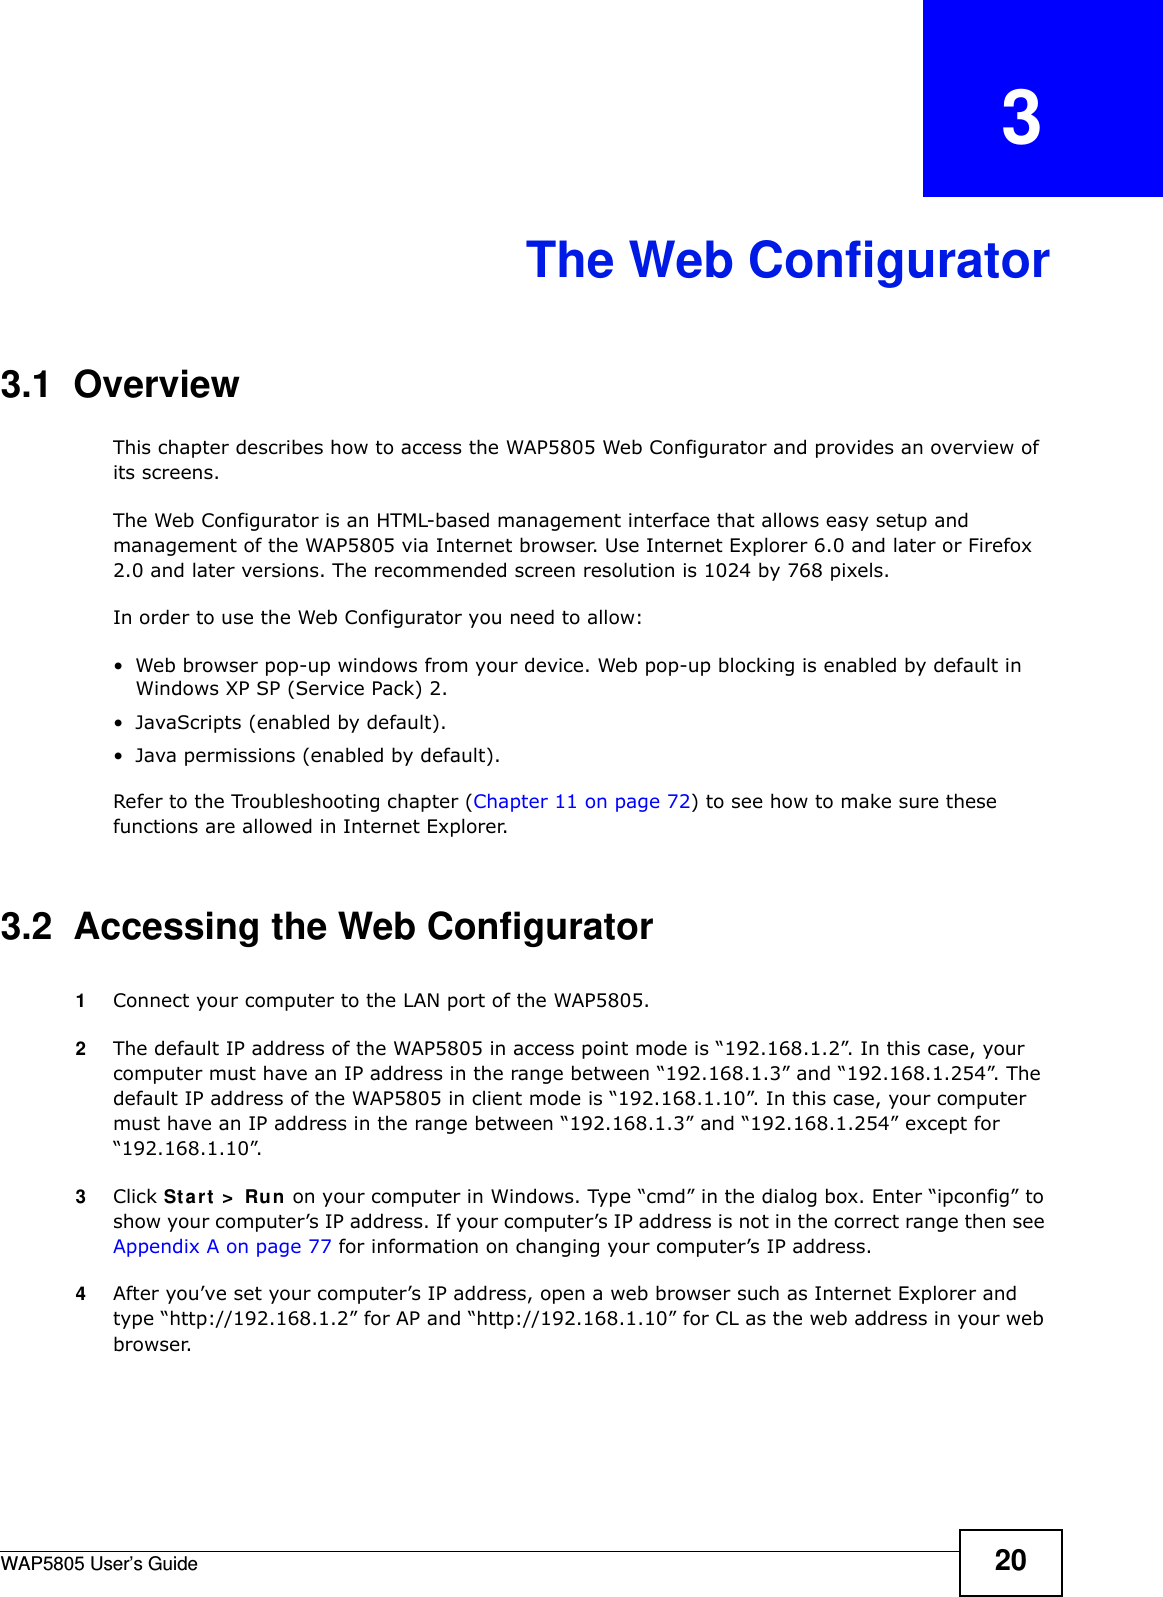 WAP5805 User’s Guide 20CHAPTER   3The Web Configurator3.1  OverviewThis chapter describes how to access the WAP5805 Web Configurator and provides an overview of its screens.The Web Configurator is an HTML-based management interface that allows easy setup and management of the WAP5805 via Internet browser. Use Internet Explorer 6.0 and later or Firefox 2.0 and later versions. The recommended screen resolution is 1024 by 768 pixels.In order to use the Web Configurator you need to allow:• Web browser pop-up windows from your device. Web pop-up blocking is enabled by default in Windows XP SP (Service Pack) 2.• JavaScripts (enabled by default).• Java permissions (enabled by default).Refer to the Troubleshooting chapter (Chapter 11 on page 72) to see how to make sure these functions are allowed in Internet Explorer.3.2  Accessing the Web Configurator 1Connect your computer to the LAN port of the WAP5805. 2The default IP address of the WAP5805 in access point mode is “192.168.1.2”. In this case, your computer must have an IP address in the range between “192.168.1.3” and “192.168.1.254”. The default IP address of the WAP5805 in client mode is “192.168.1.10”. In this case, your computer must have an IP address in the range between “192.168.1.3” and “192.168.1.254” except for “192.168.1.10”.3Click Start &gt; Run on your computer in Windows. Type “cmd” in the dialog box. Enter “ipconfig” to show your computer’s IP address. If your computer’s IP address is not in the correct range then see Appendix A on page 77 for information on changing your computer’s IP address.4After you’ve set your computer’s IP address, open a web browser such as Internet Explorer and type “http://192.168.1.2” for AP and “http://192.168.1.10” for CL as the web address in your web browser.